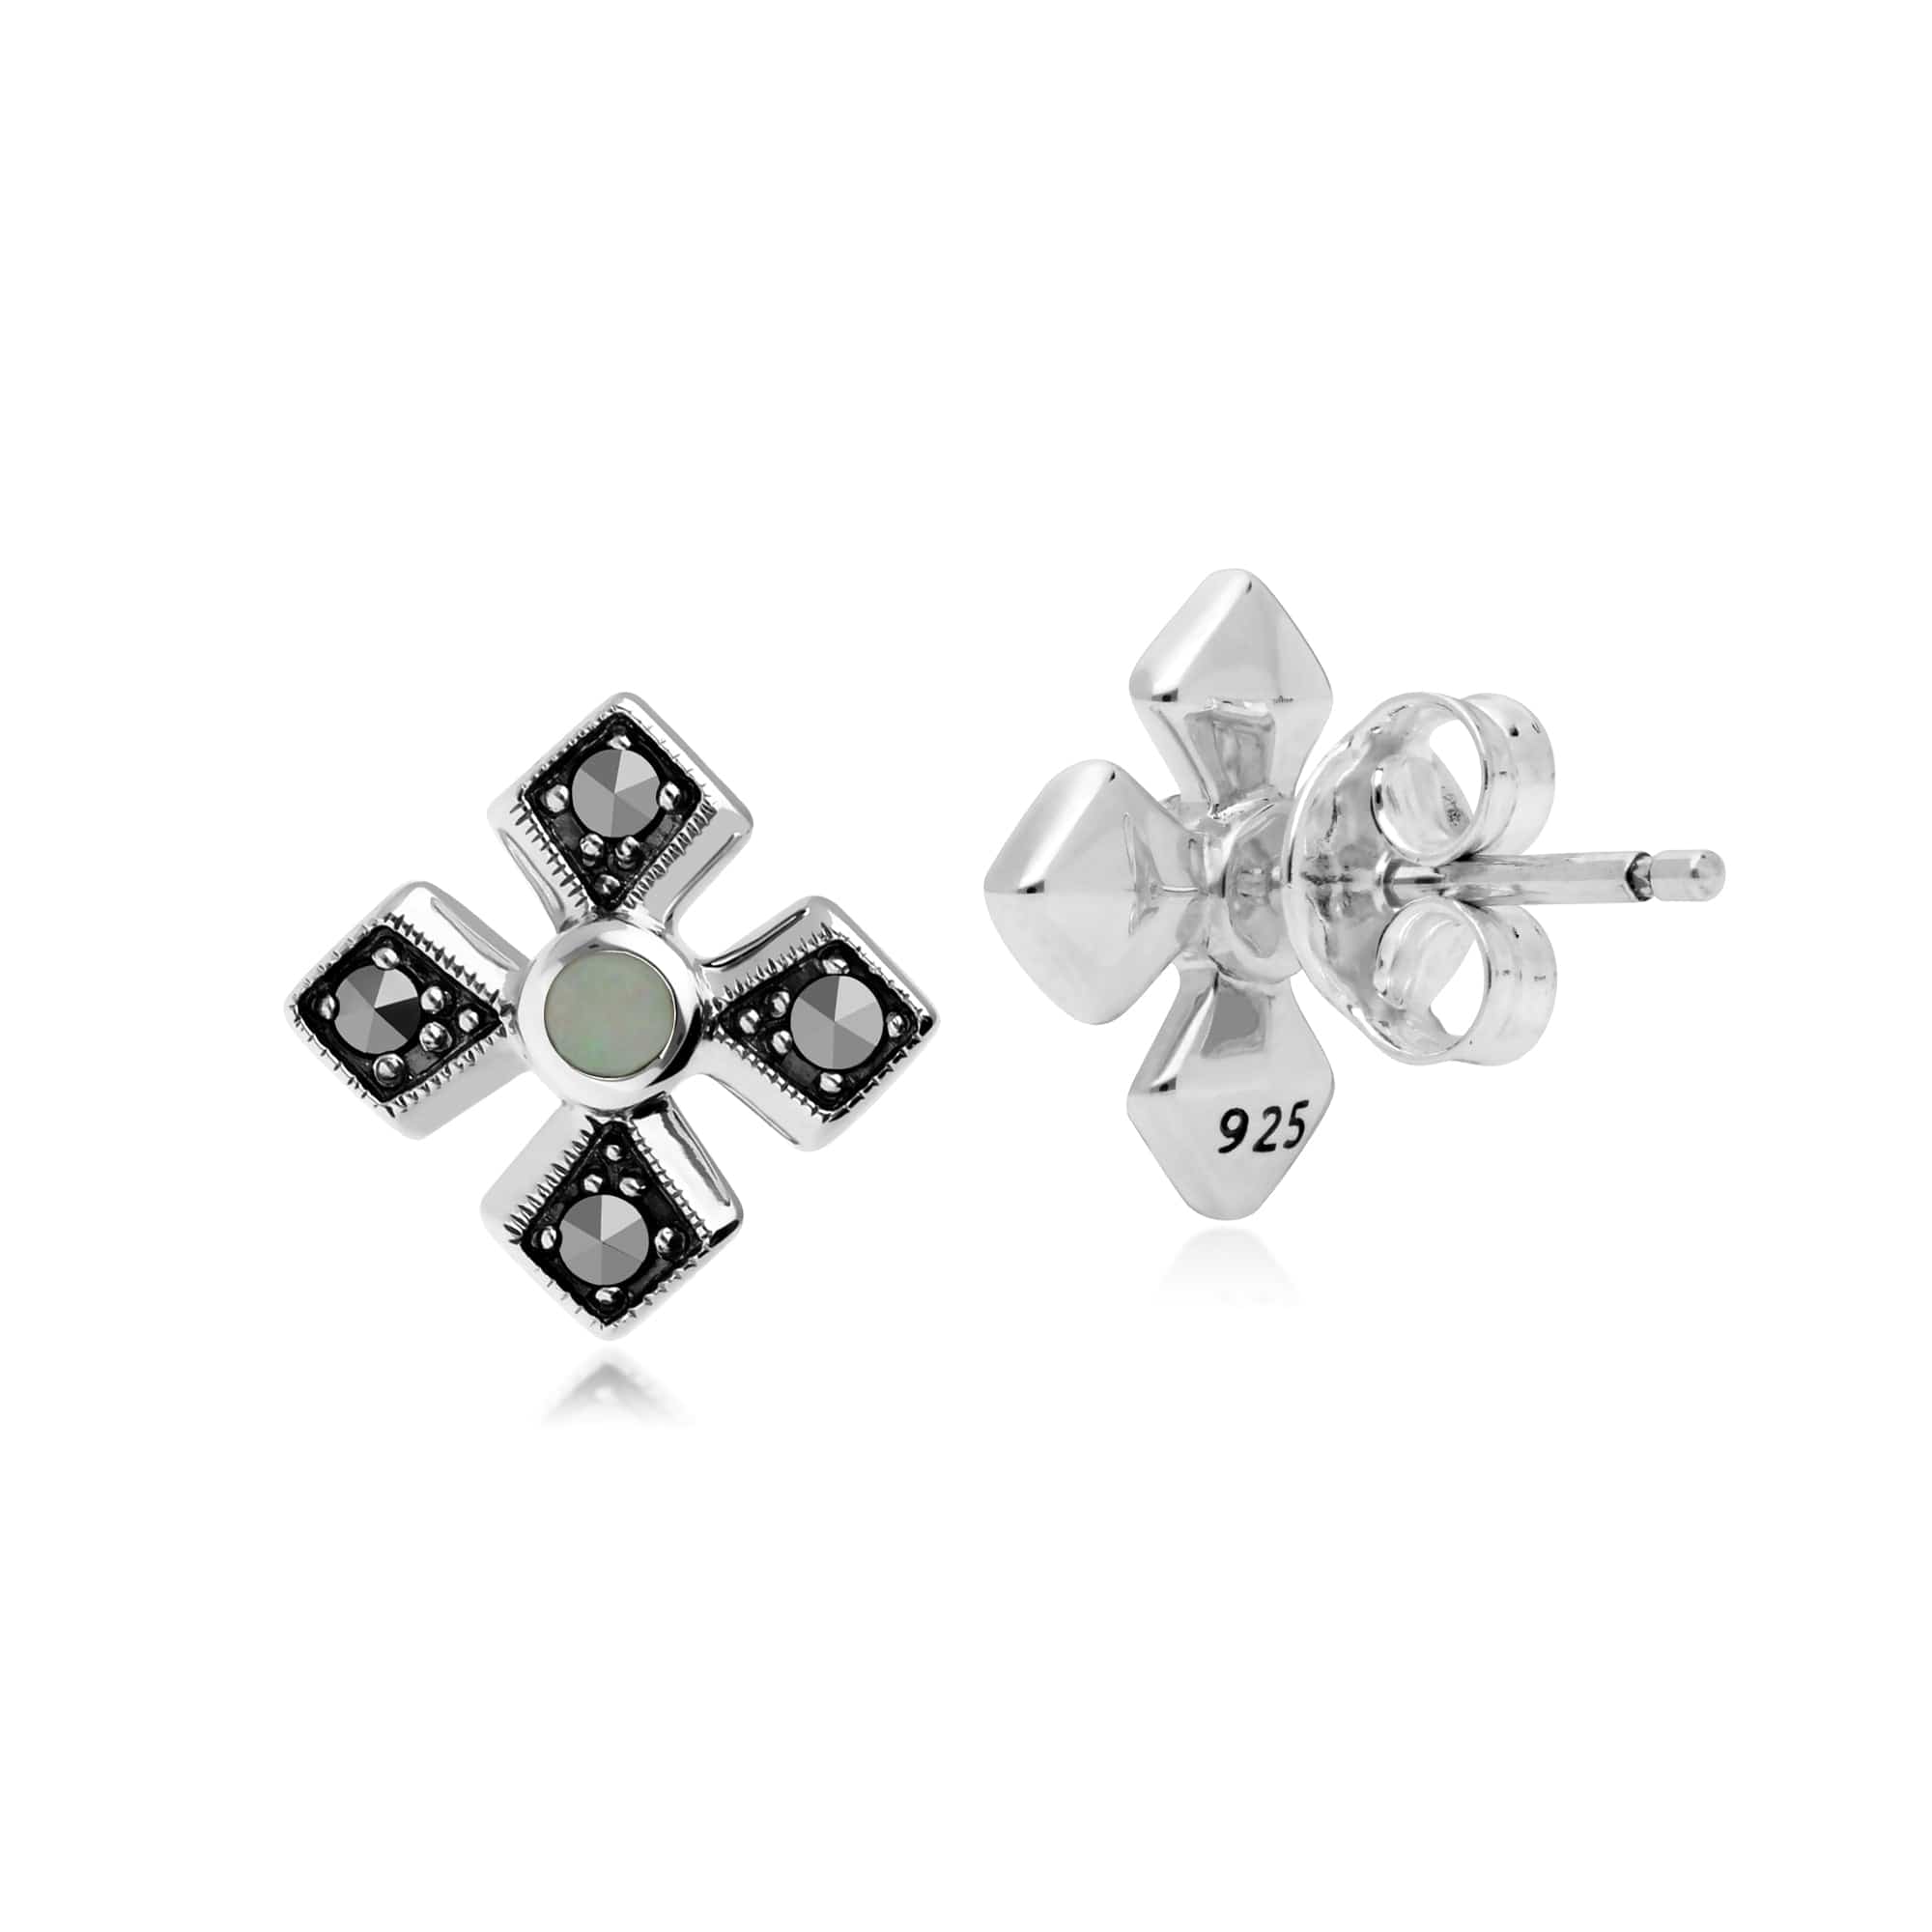 214E859901925 Art Deco Style Round Opal & Marcasite Gothic Style Cross Studs in 925 Sterling Silver 2